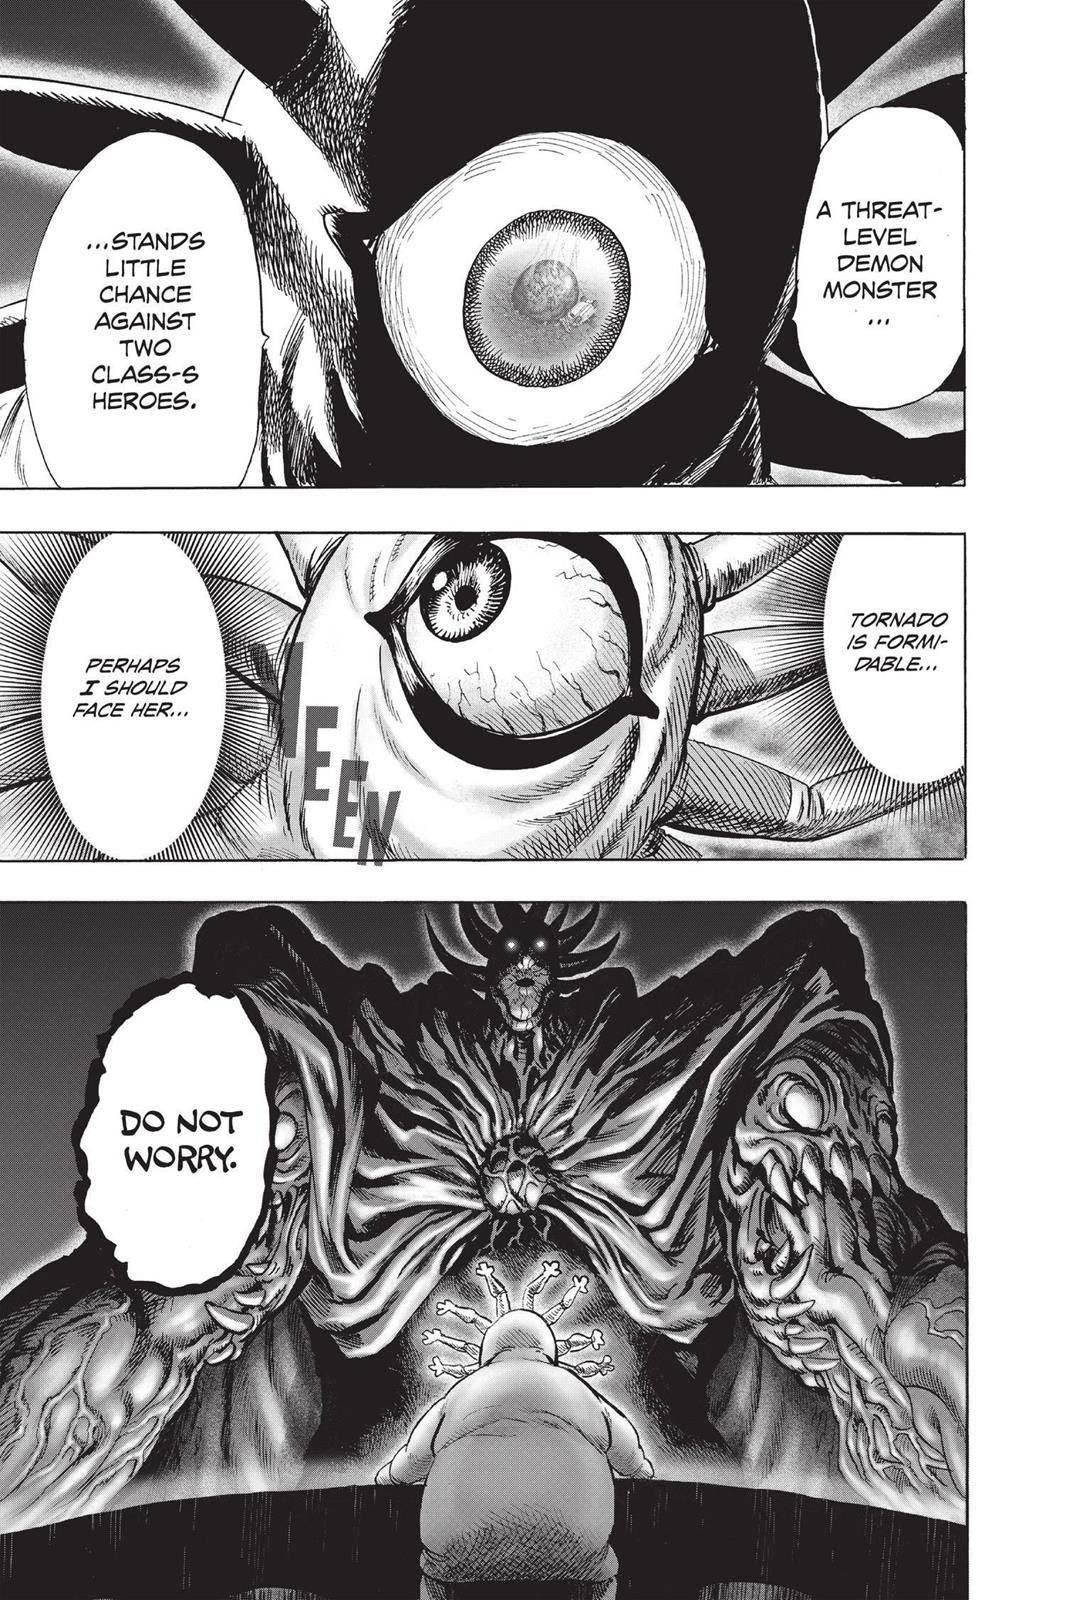 One-Punch Man, Punch 68 image 47